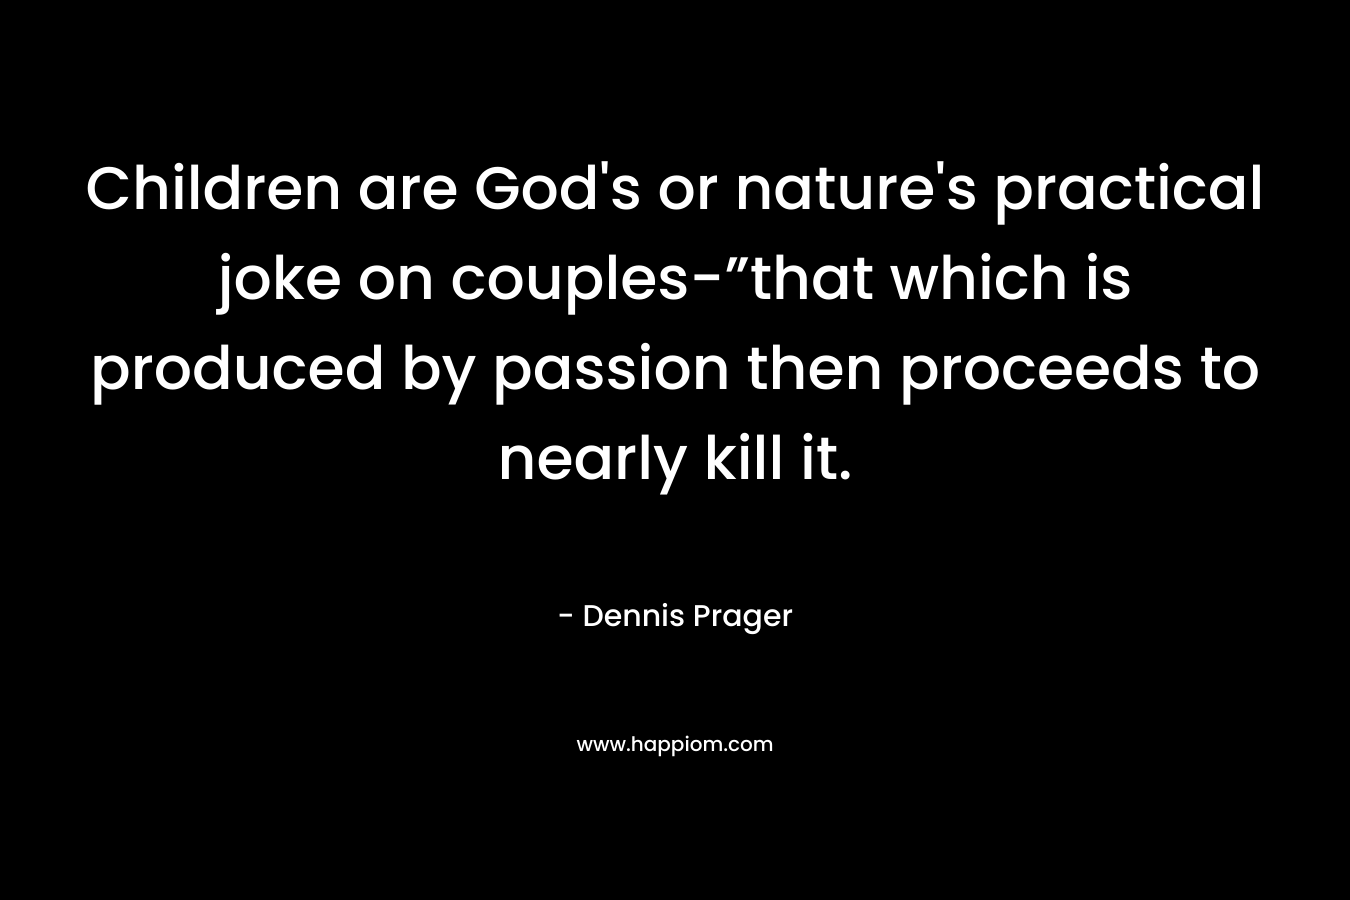 Children are God's or nature's practical joke on couples-”that which is produced by passion then proceeds to nearly kill it.